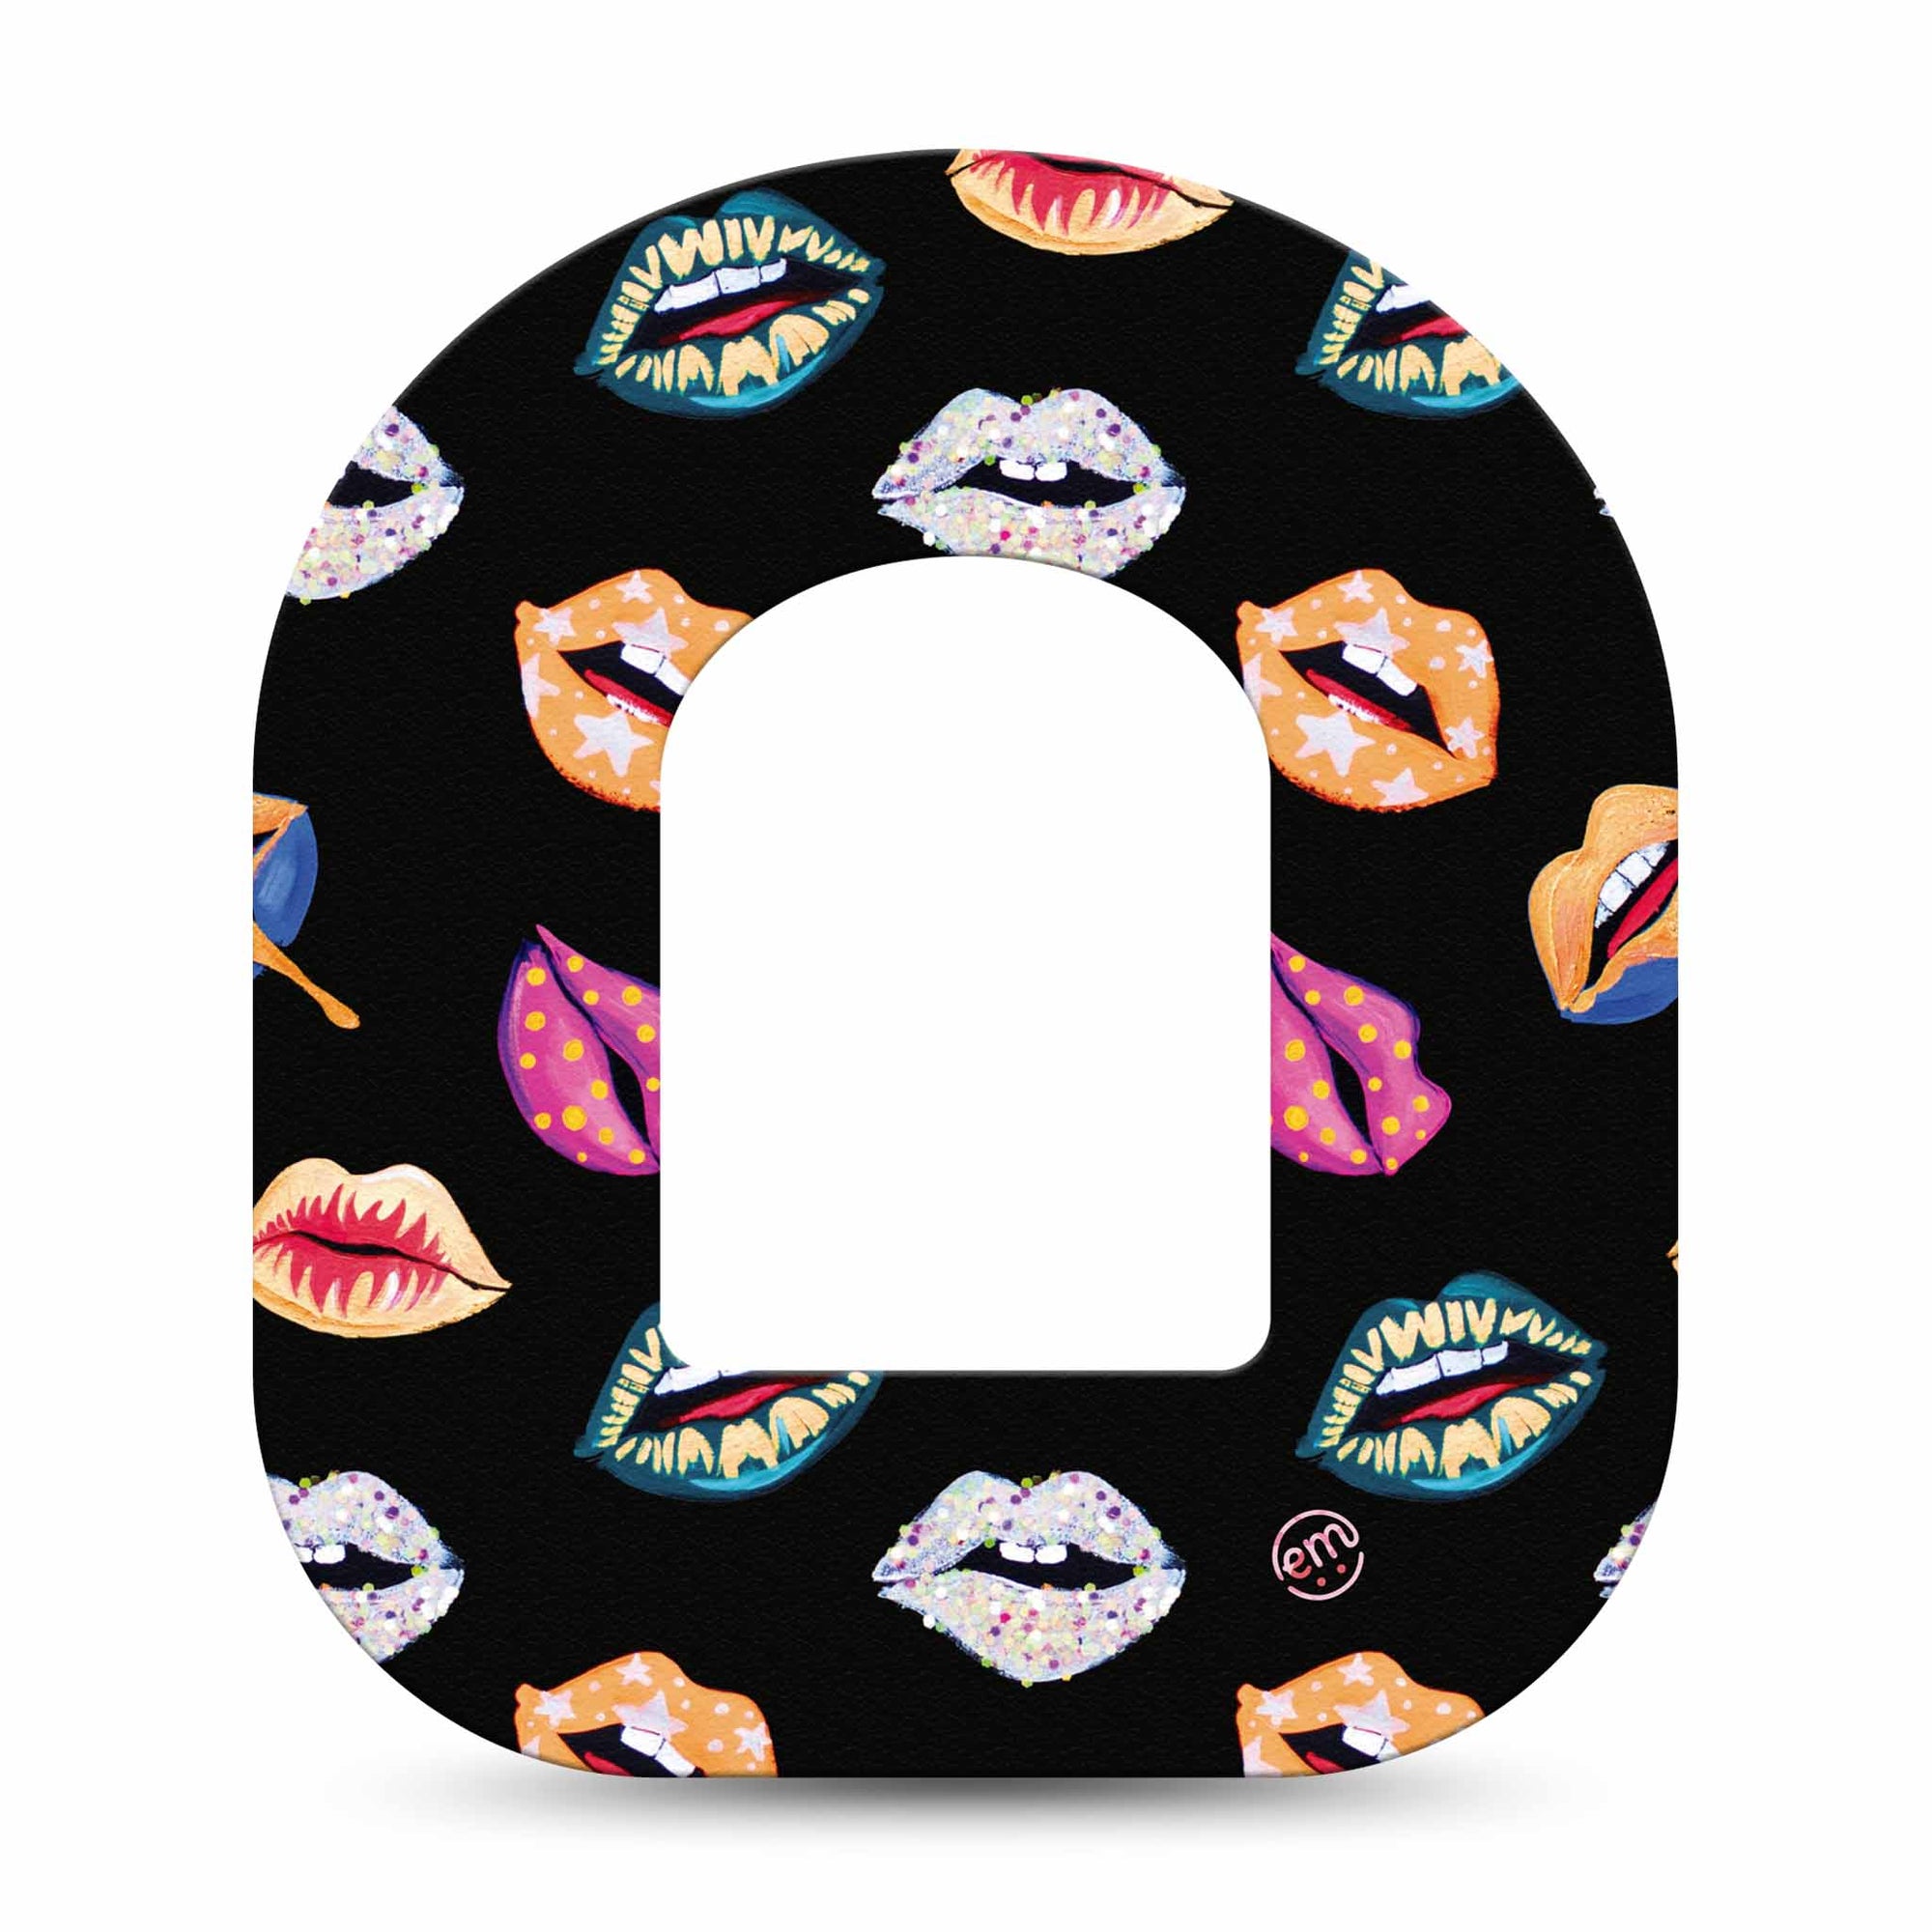 ExpressionMed Lips Pod Tape, Single, Vibrant Colored Lips Themed, CGM Plaster Patch Design